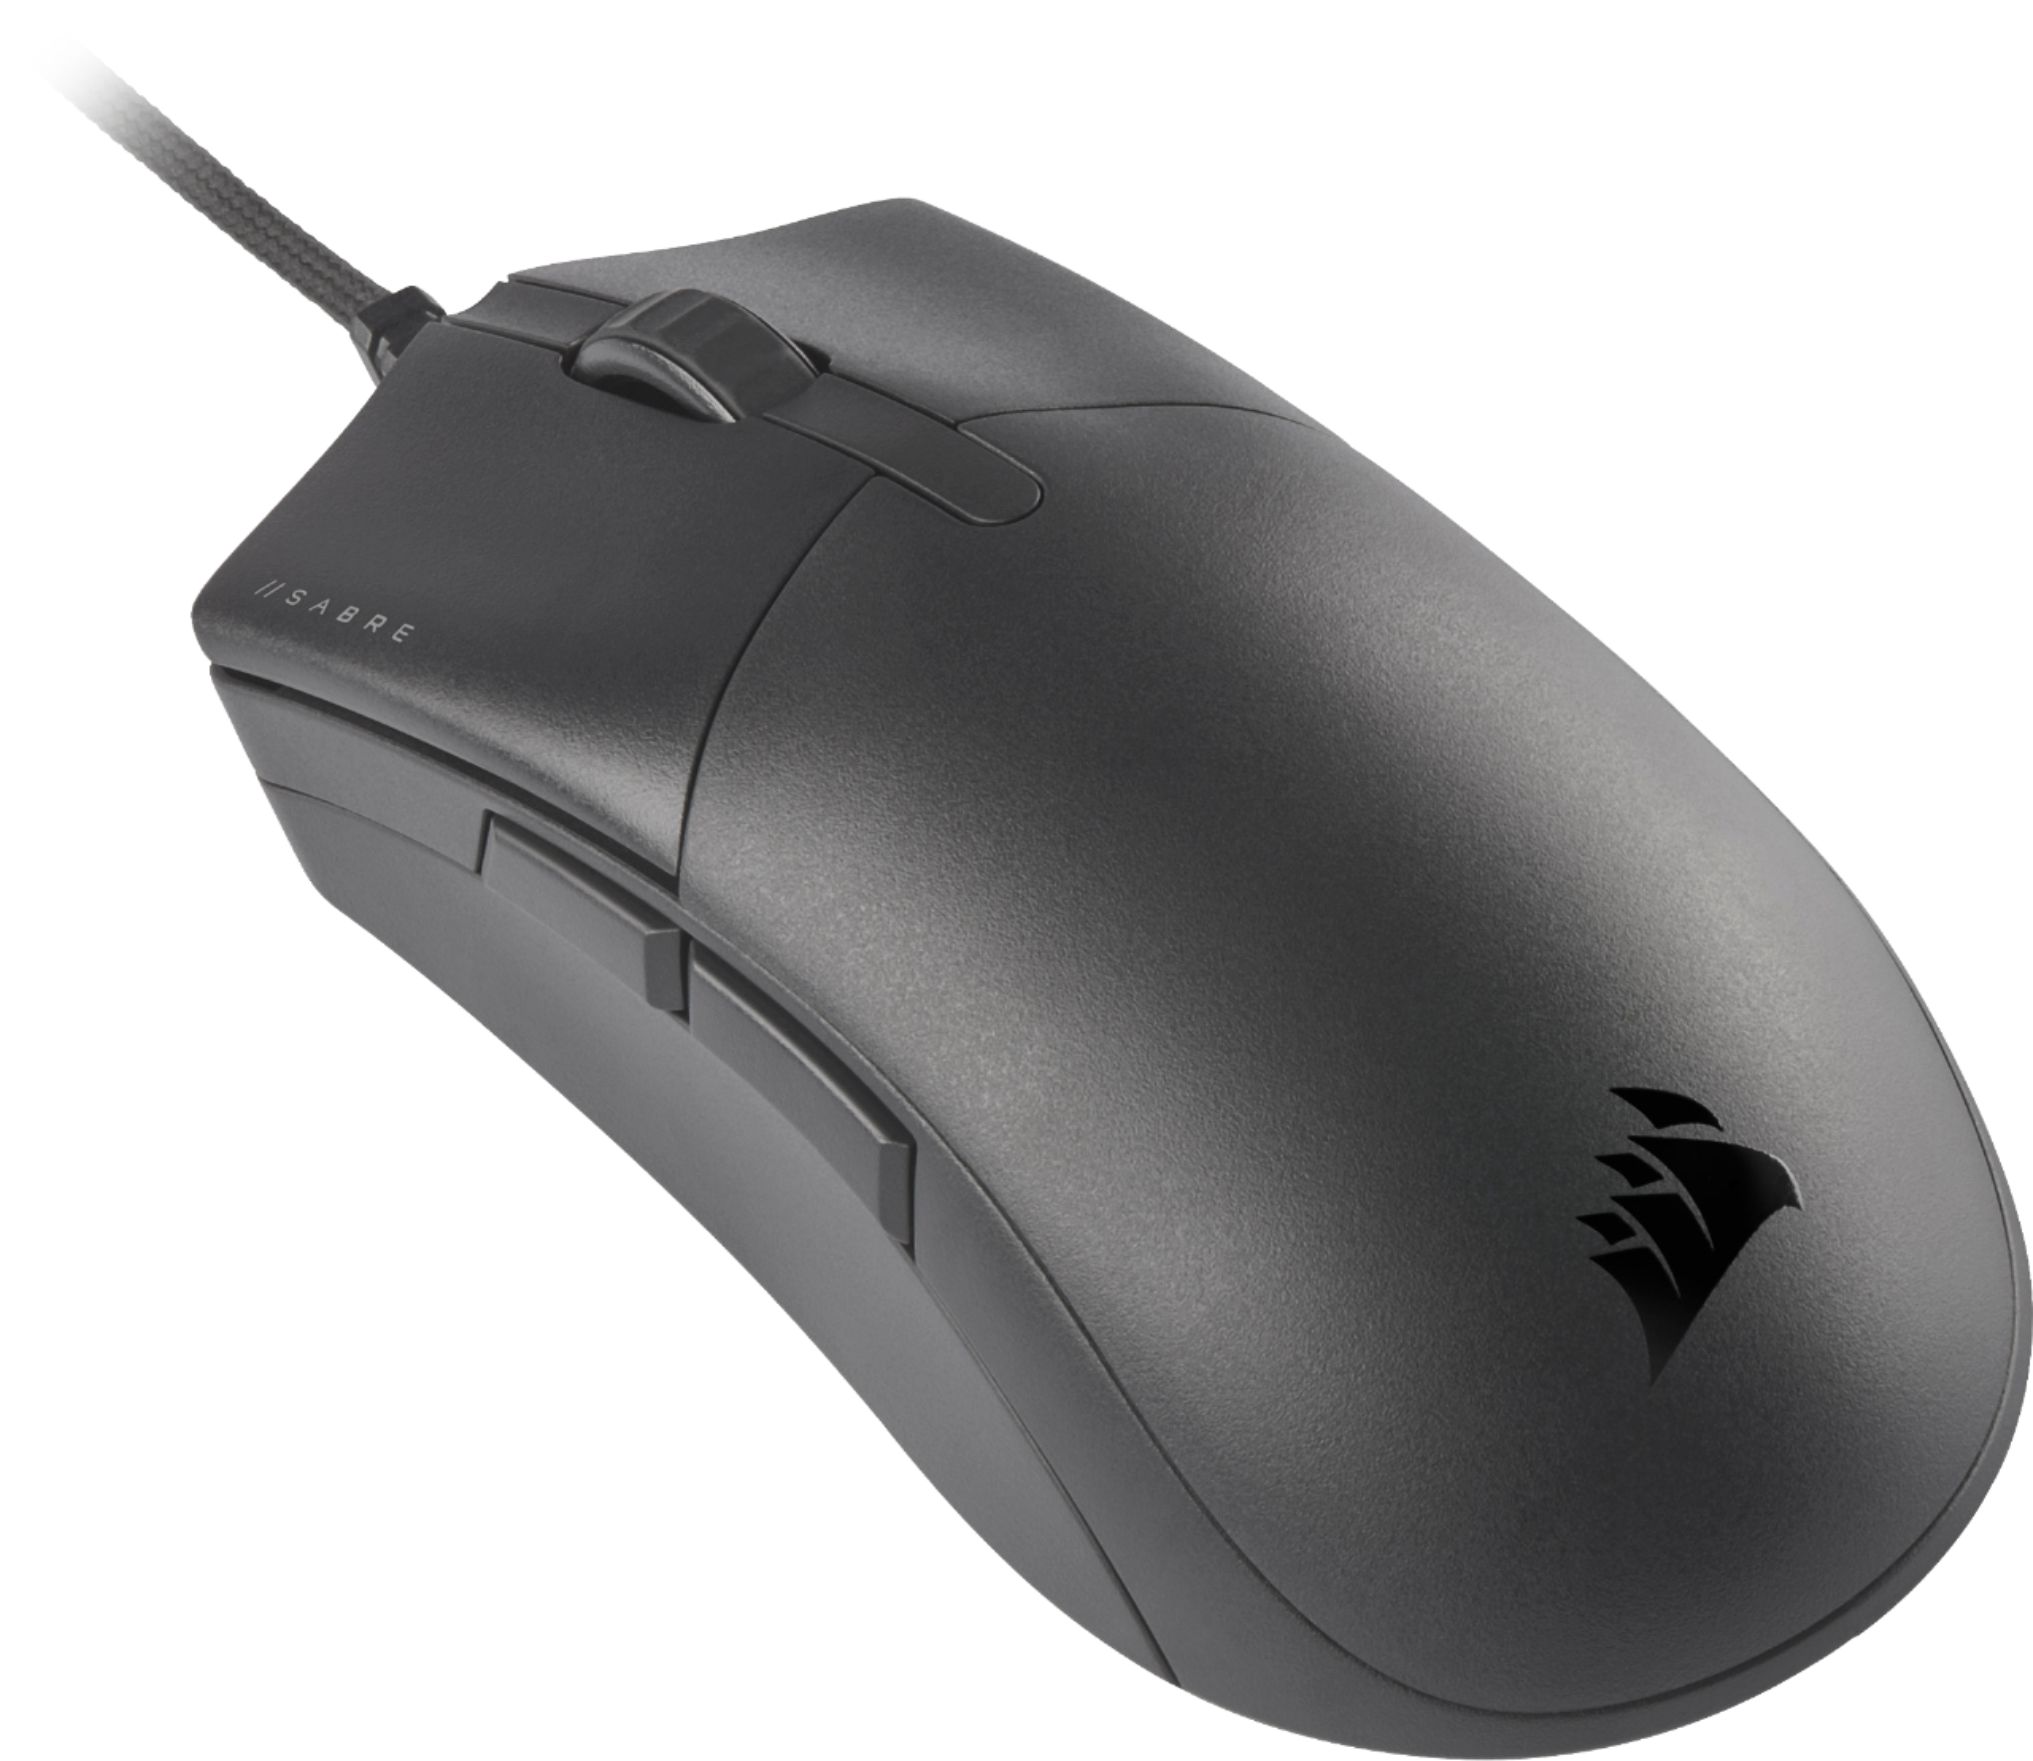 Angle View: Arozzi - Favo Light Weight Gaming Mouse - Gray